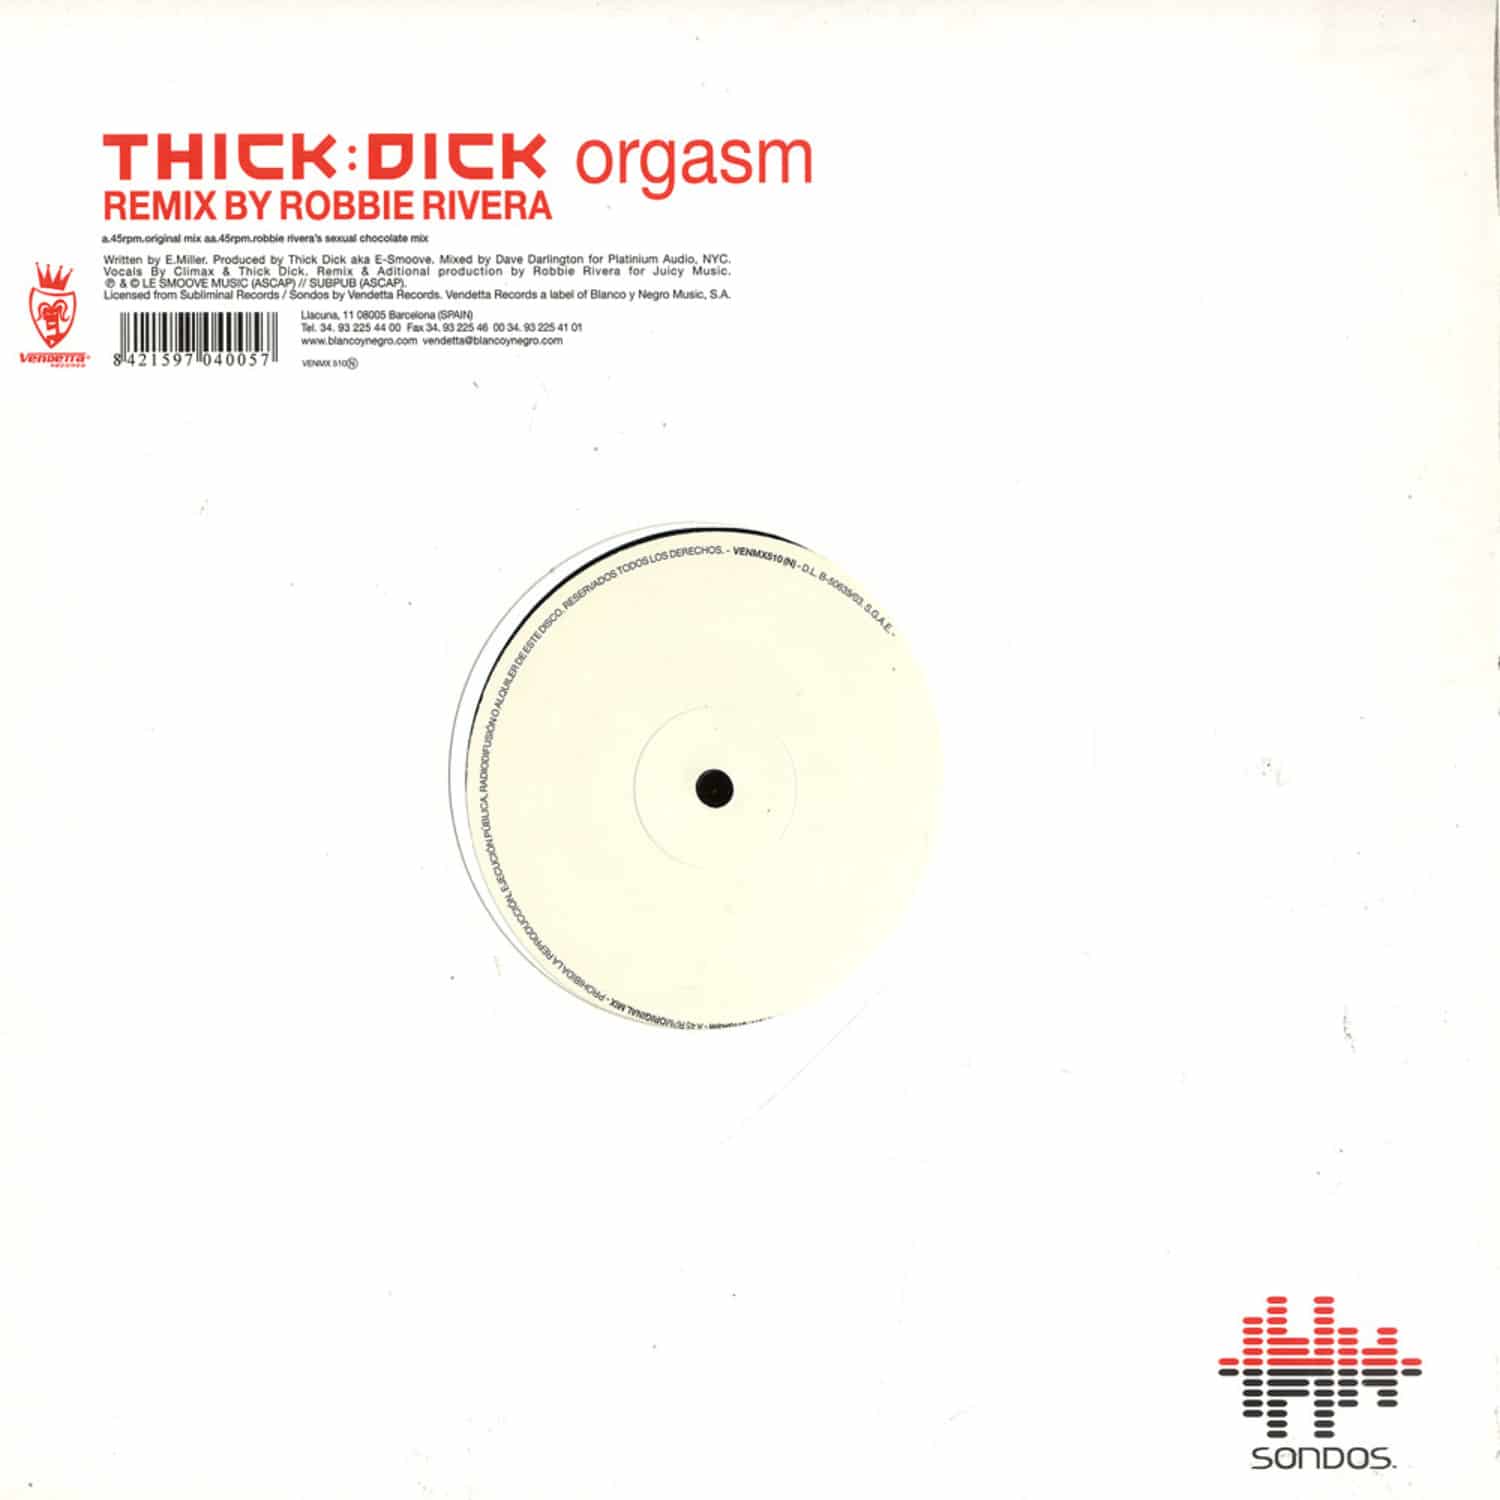 Thick Dick - ORGASM 